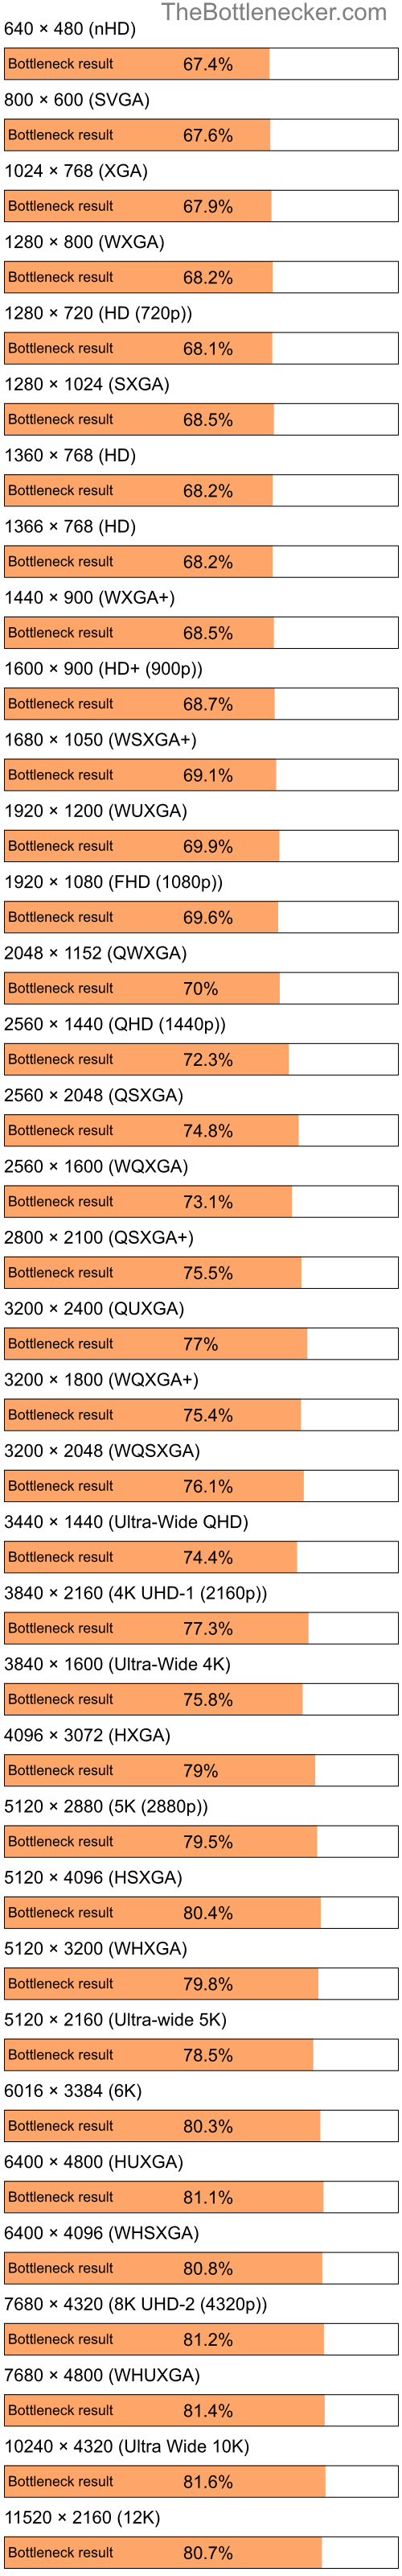 Bottleneck results by resolution for Intel Pentium 4 and AMD Radeon HD 6250 in Graphic Card Intense Tasks